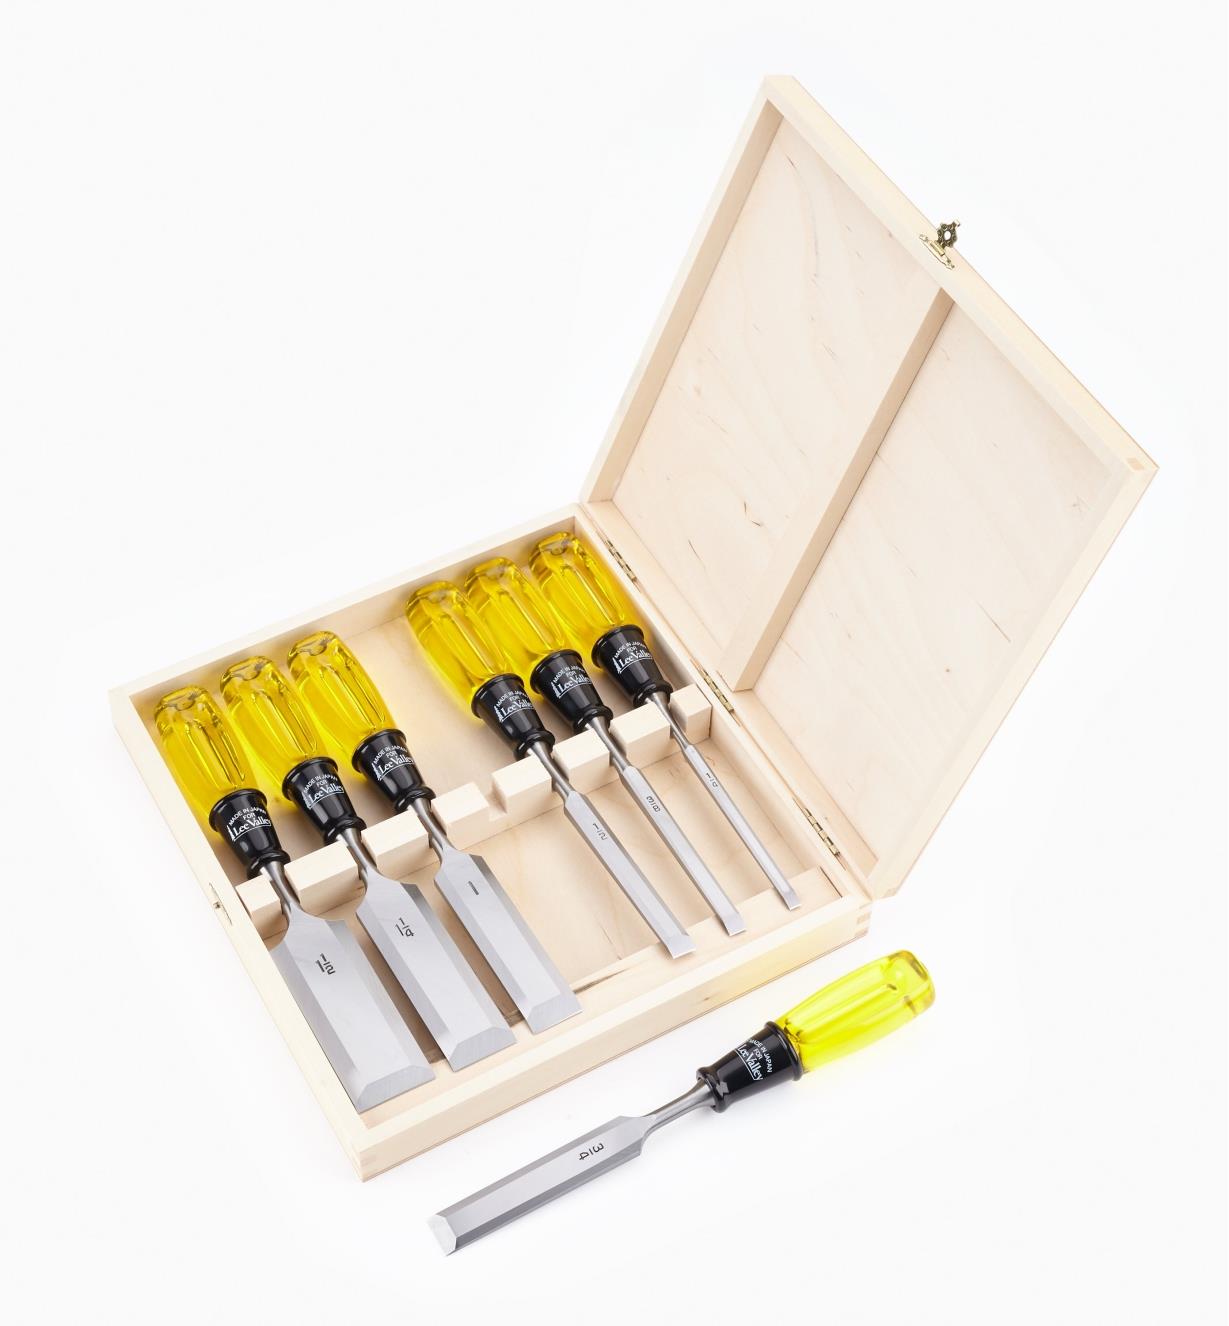 44S0123 - Boxed Set of 7 Bevel-Edge Chisels (1/4" to 1 1/2")